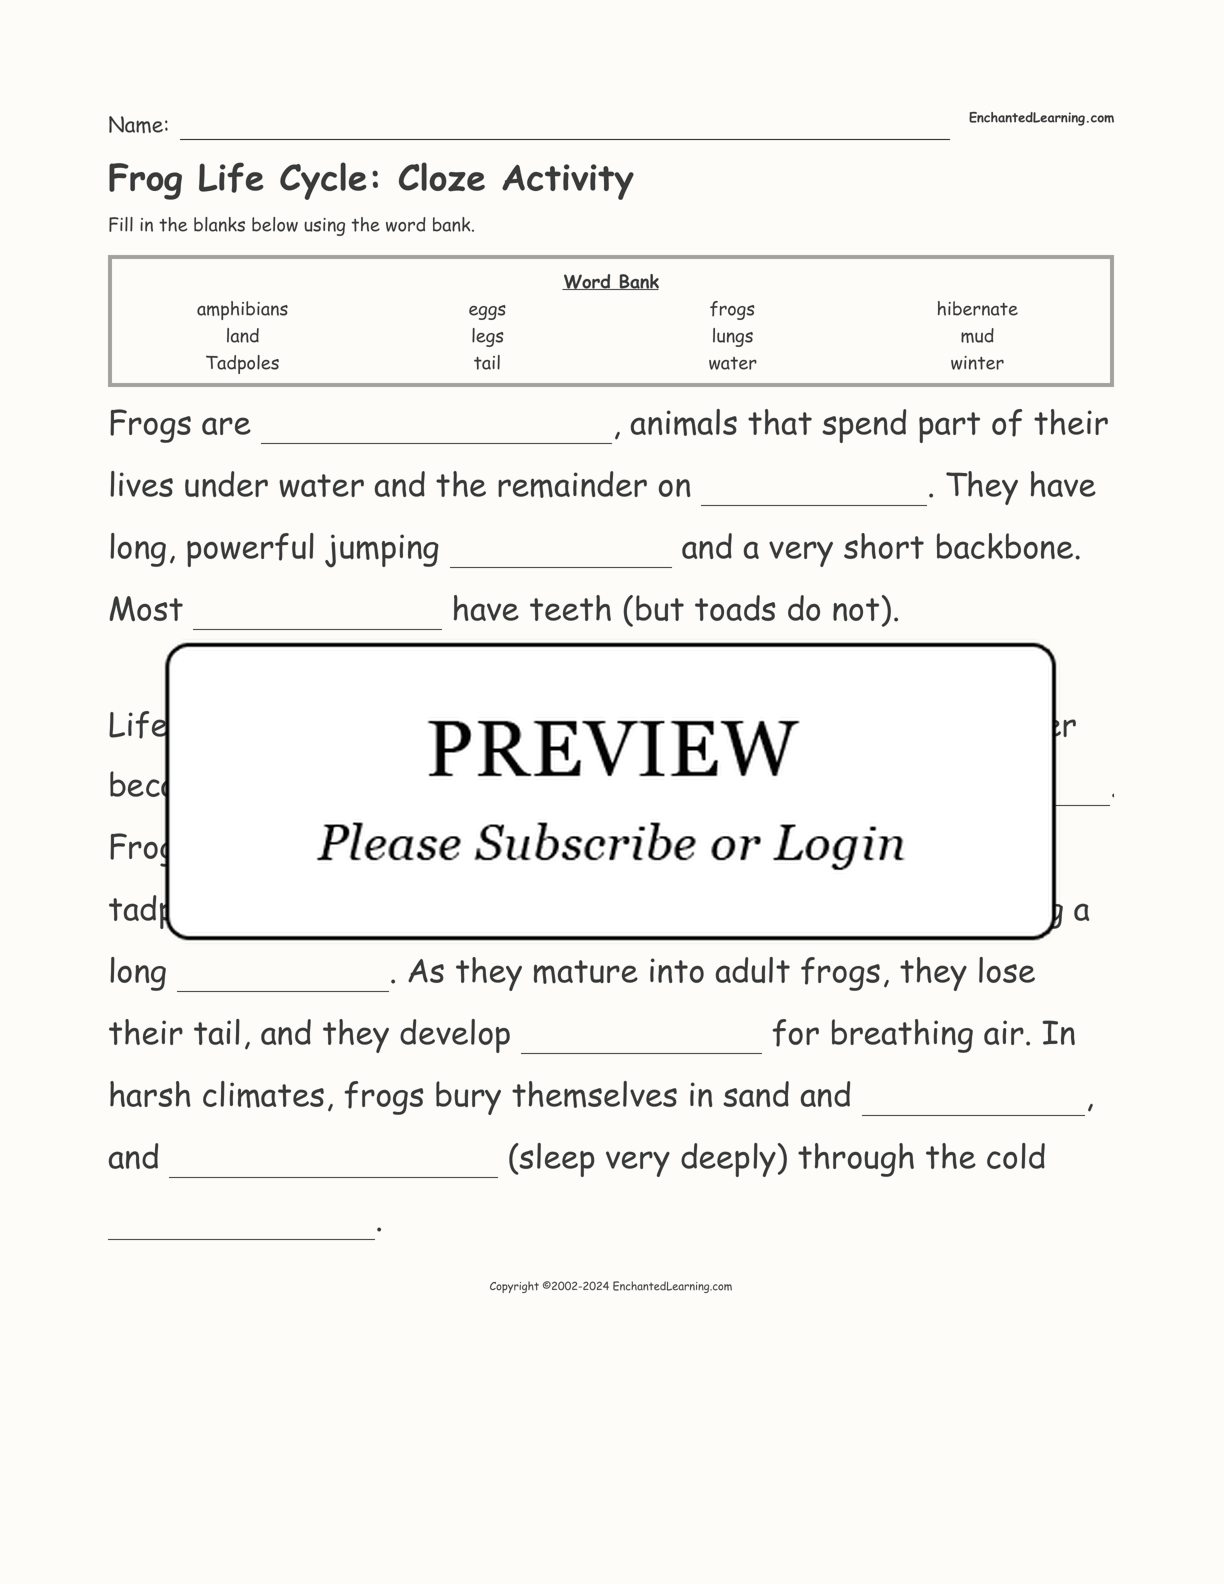 Frog Life Cycle: Cloze Activity interactive worksheet page 1